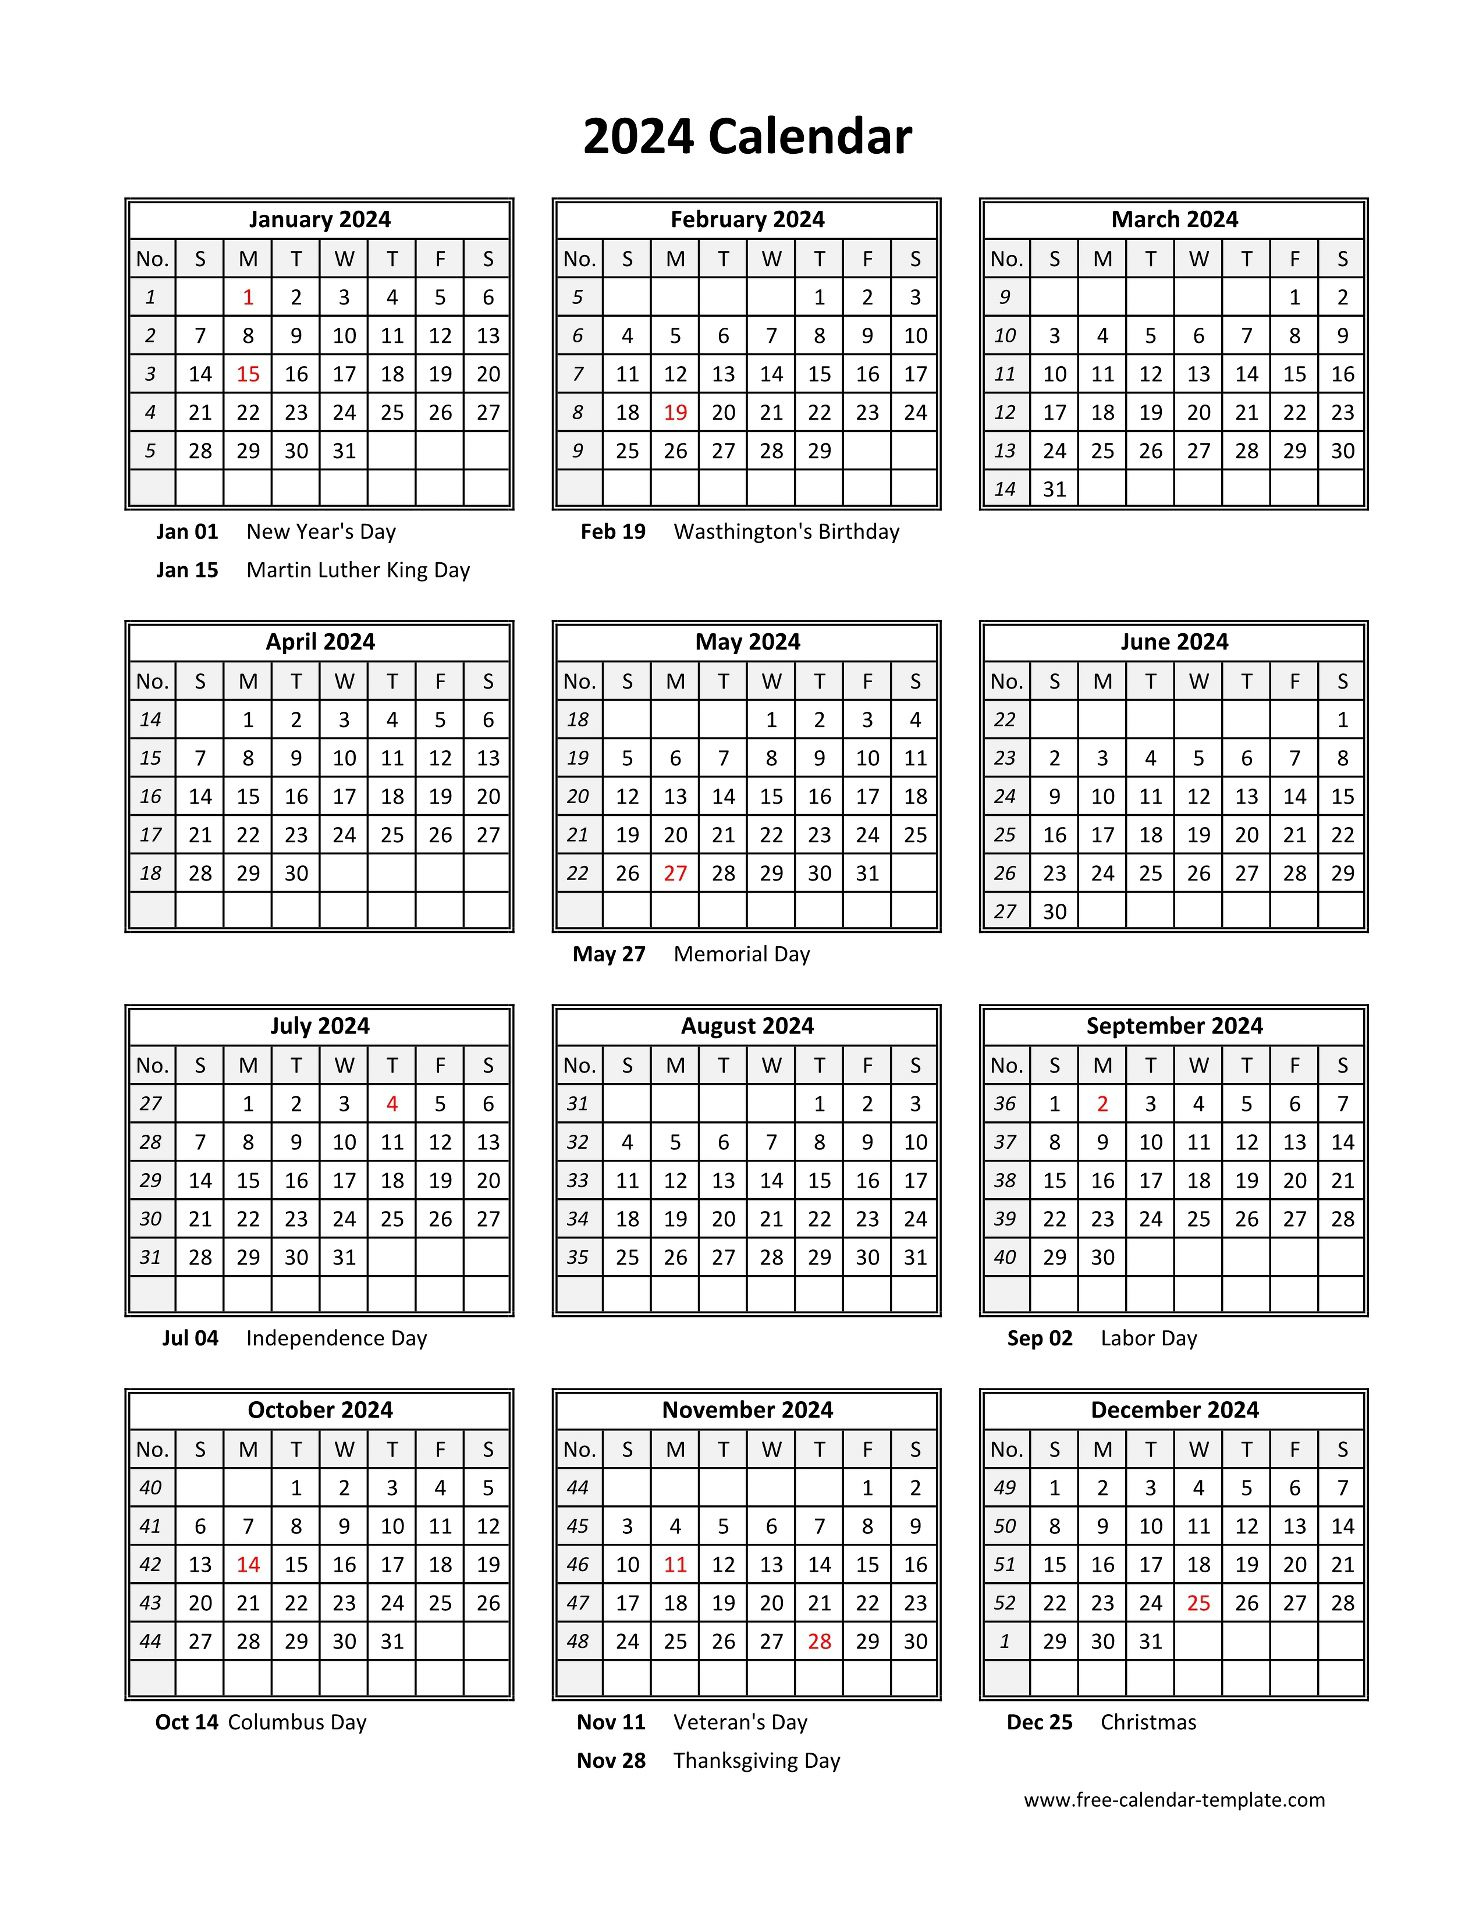 Yearly Printable Calendar 2024 With Holidays | Free-Calendar | Printable Calendar 2024 Ltr Size